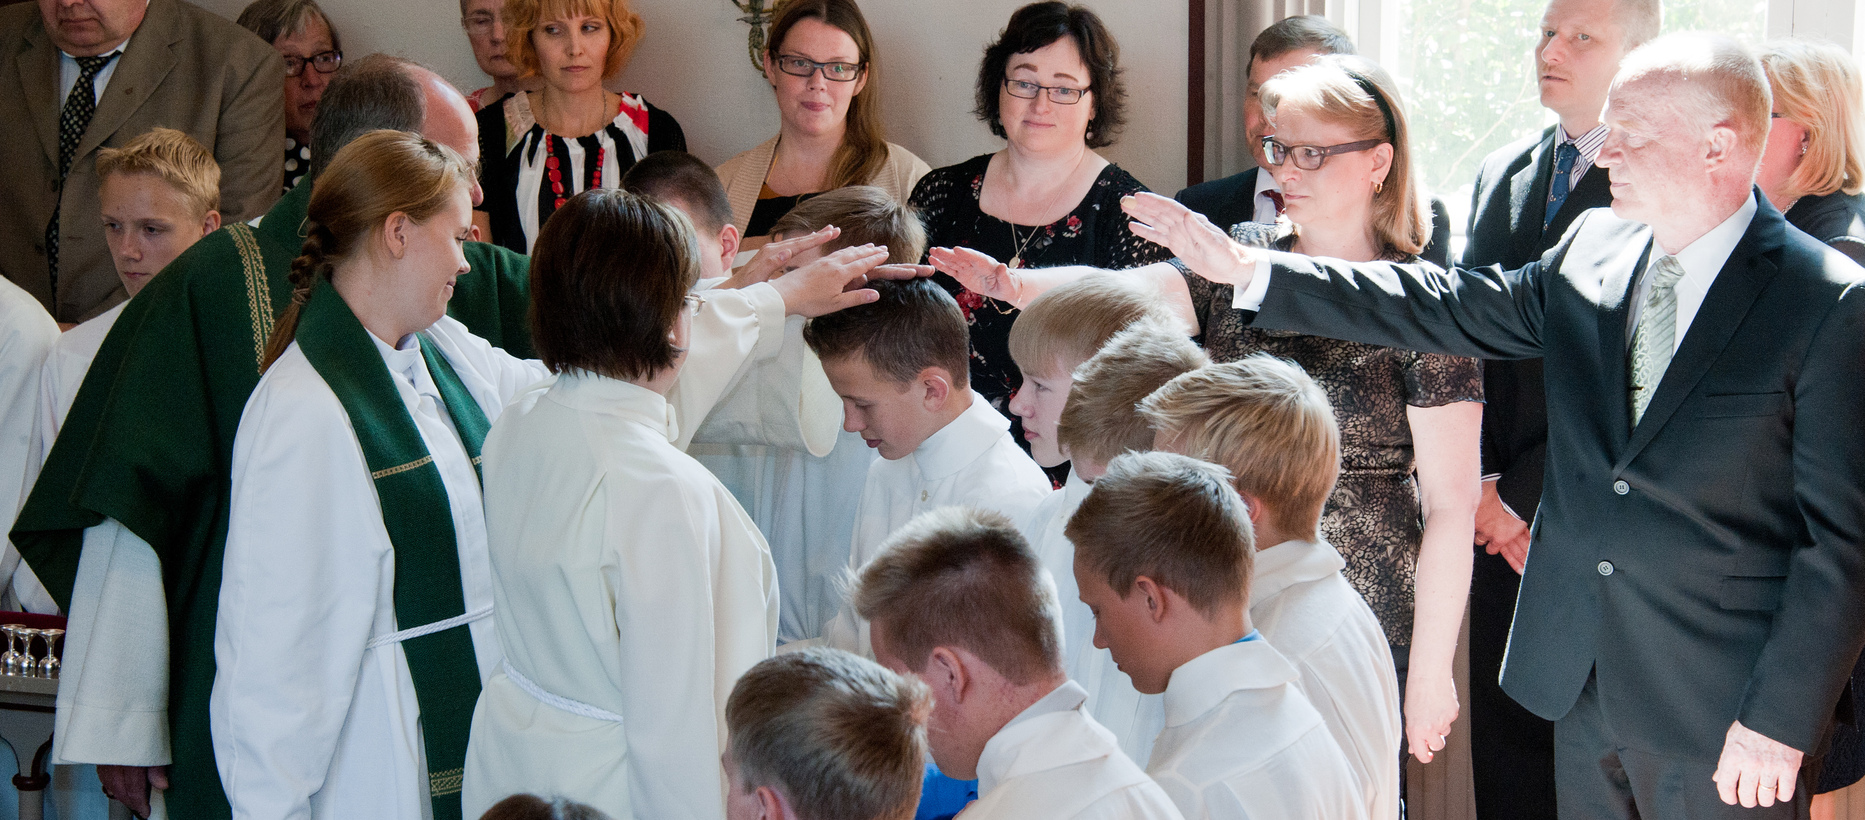 Blessing youngsters in confirmation.